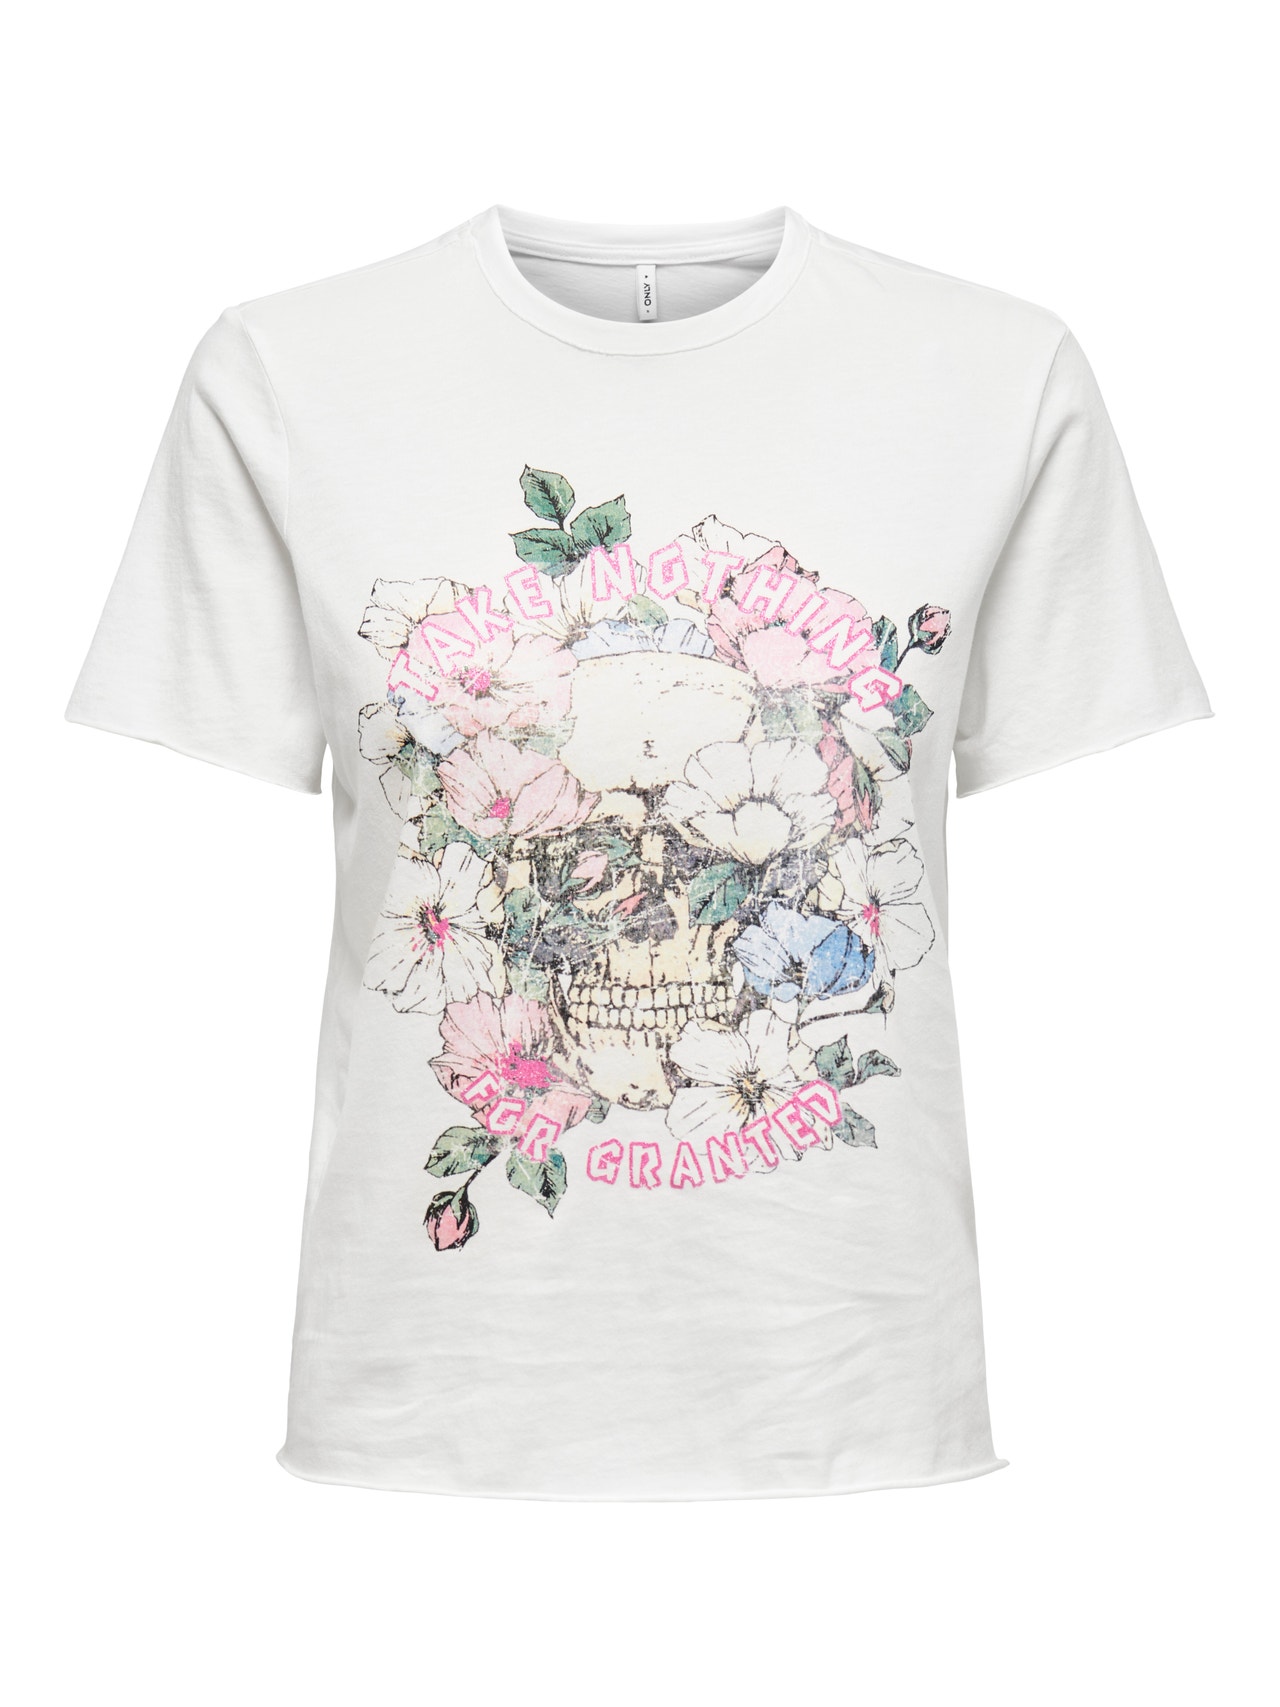 ONLY Normal passform O-ringning T-shirt -Cloud Dancer - 15307412